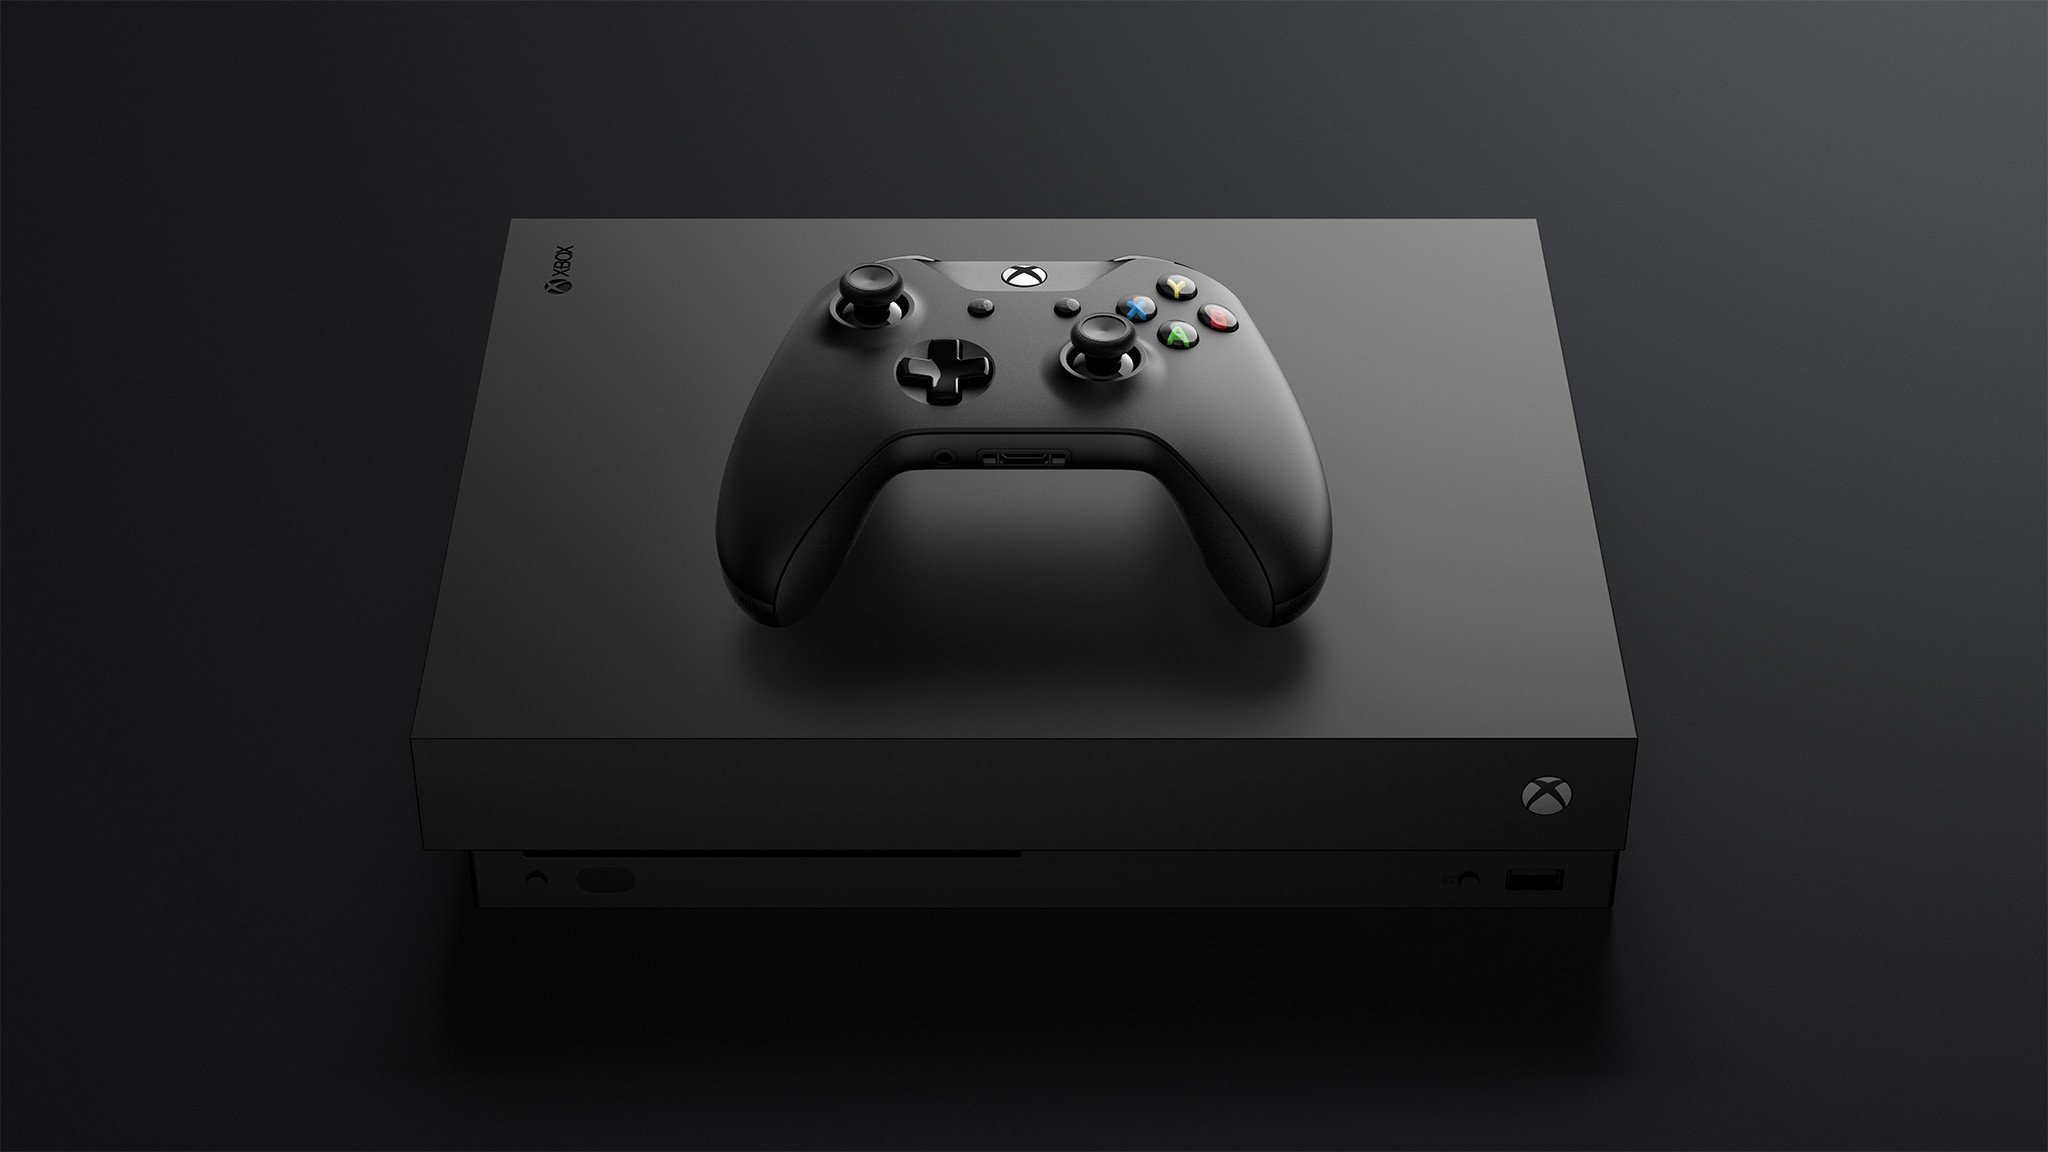 The impressive graphics of the Xbox One X means it’s a must-have for gamers.